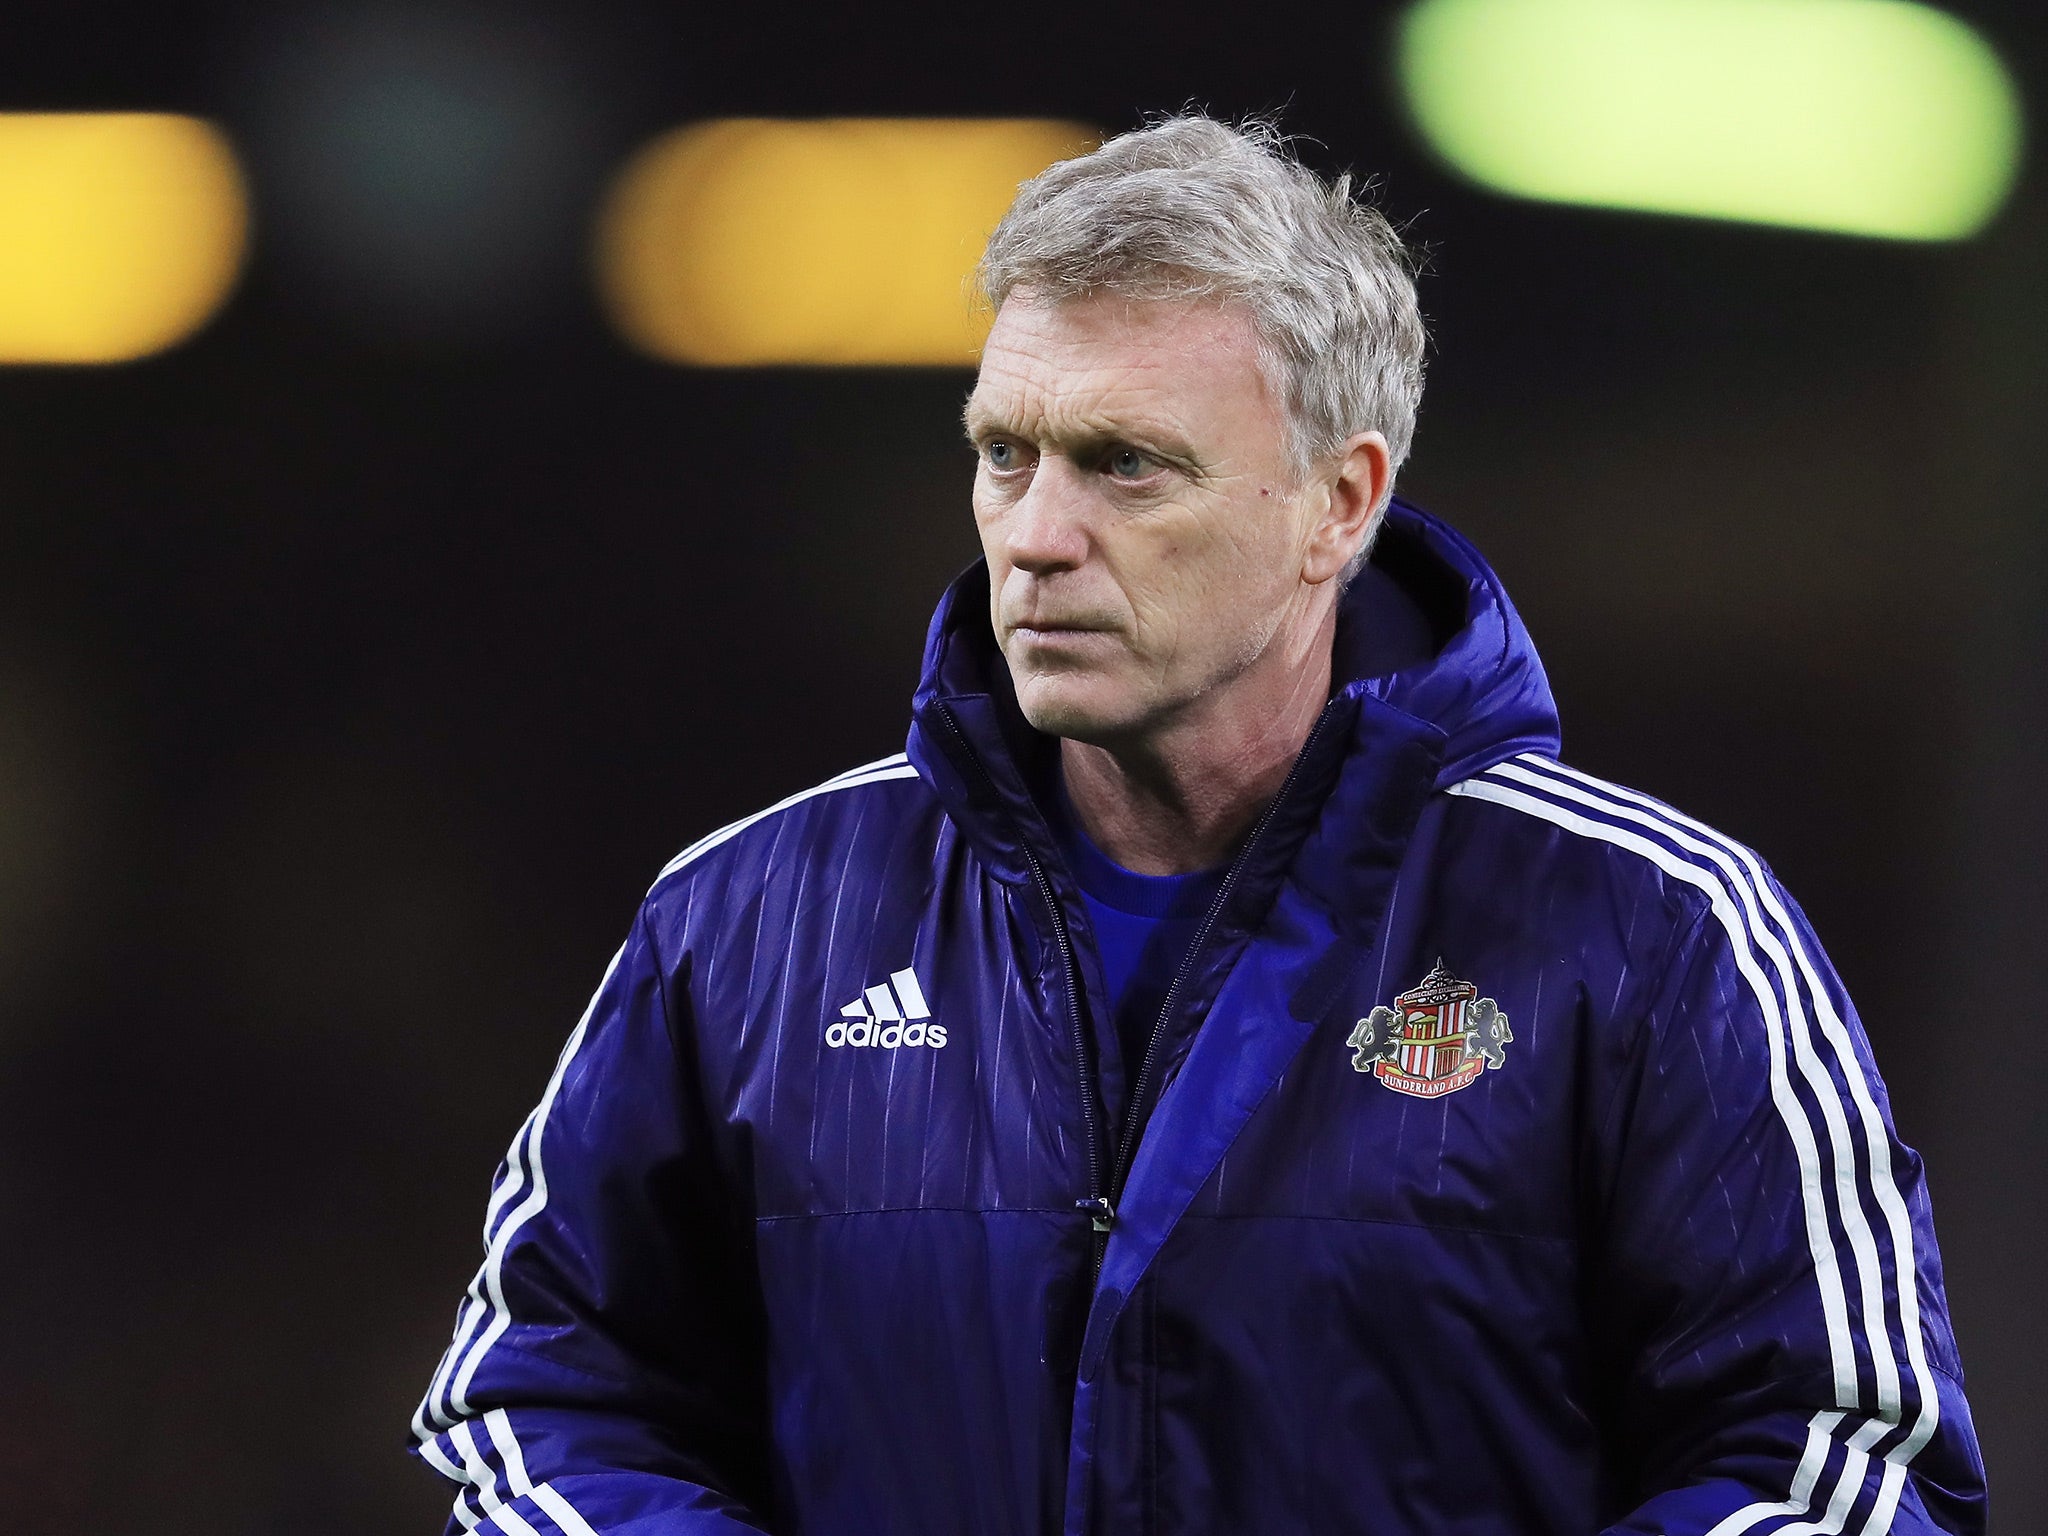 David Moyes' dismissal could make other managers inclined to make women a special case